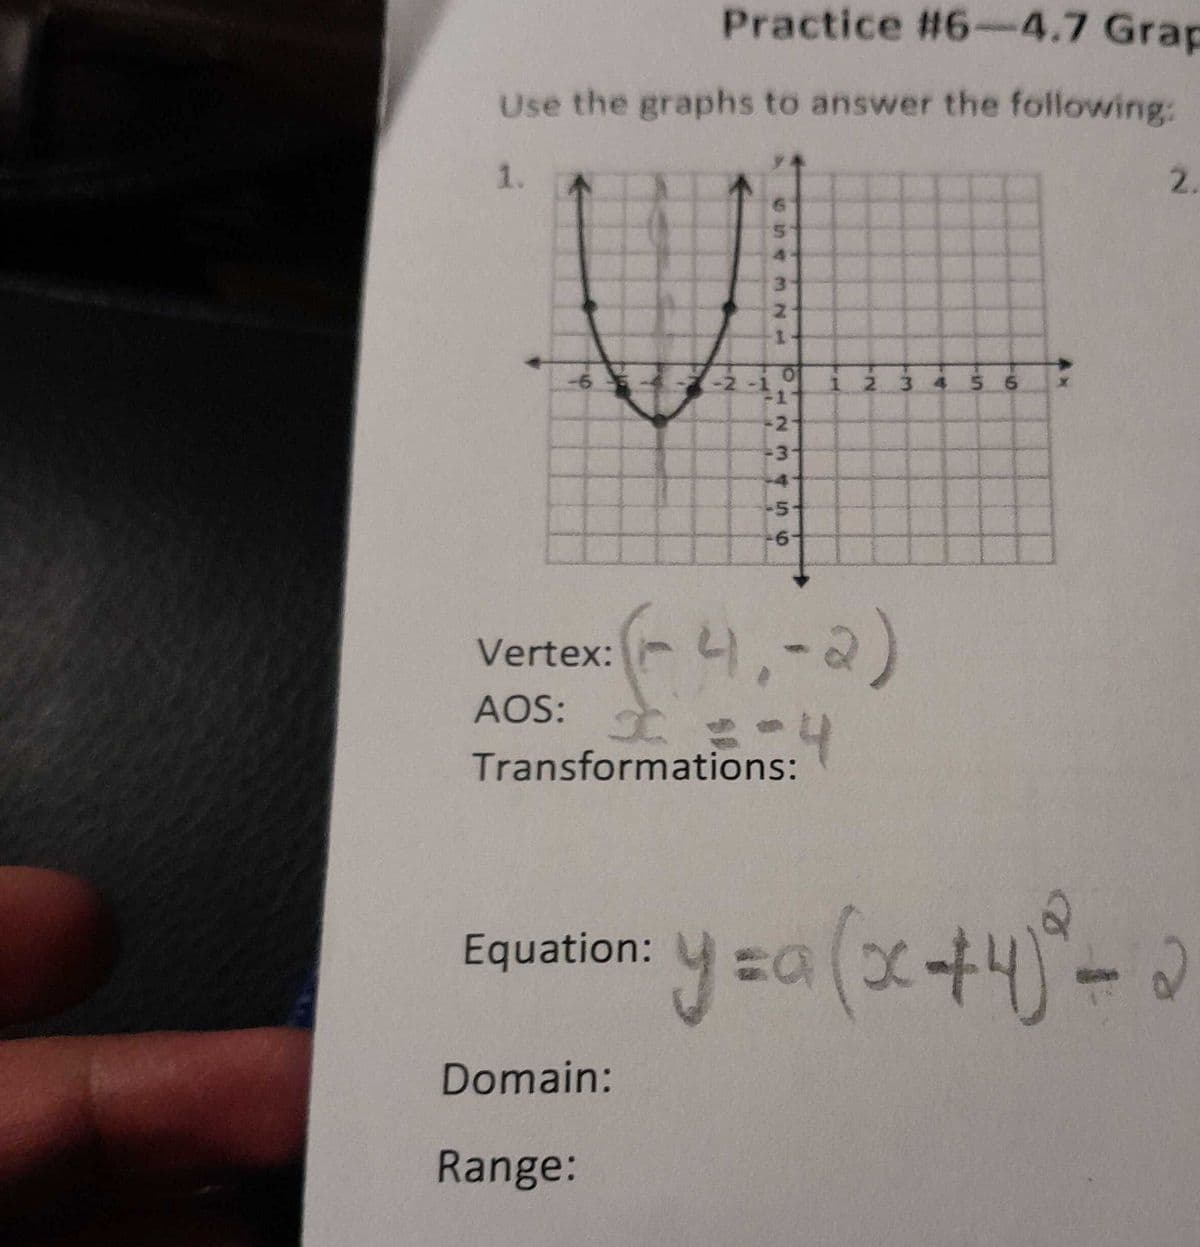 Practice #6-4.7 Grap
Use the graphs to answer the following:
1.
-6
-2
Equation:
Domain:
Range:
hay
1
1
2
M45 10
5
-6-
Vertex:
AOS: I
Transformations:
(-4,-2)
6.4
1 2 3 4 5 6
2.
y = a (x+4)⁰² - 0
2